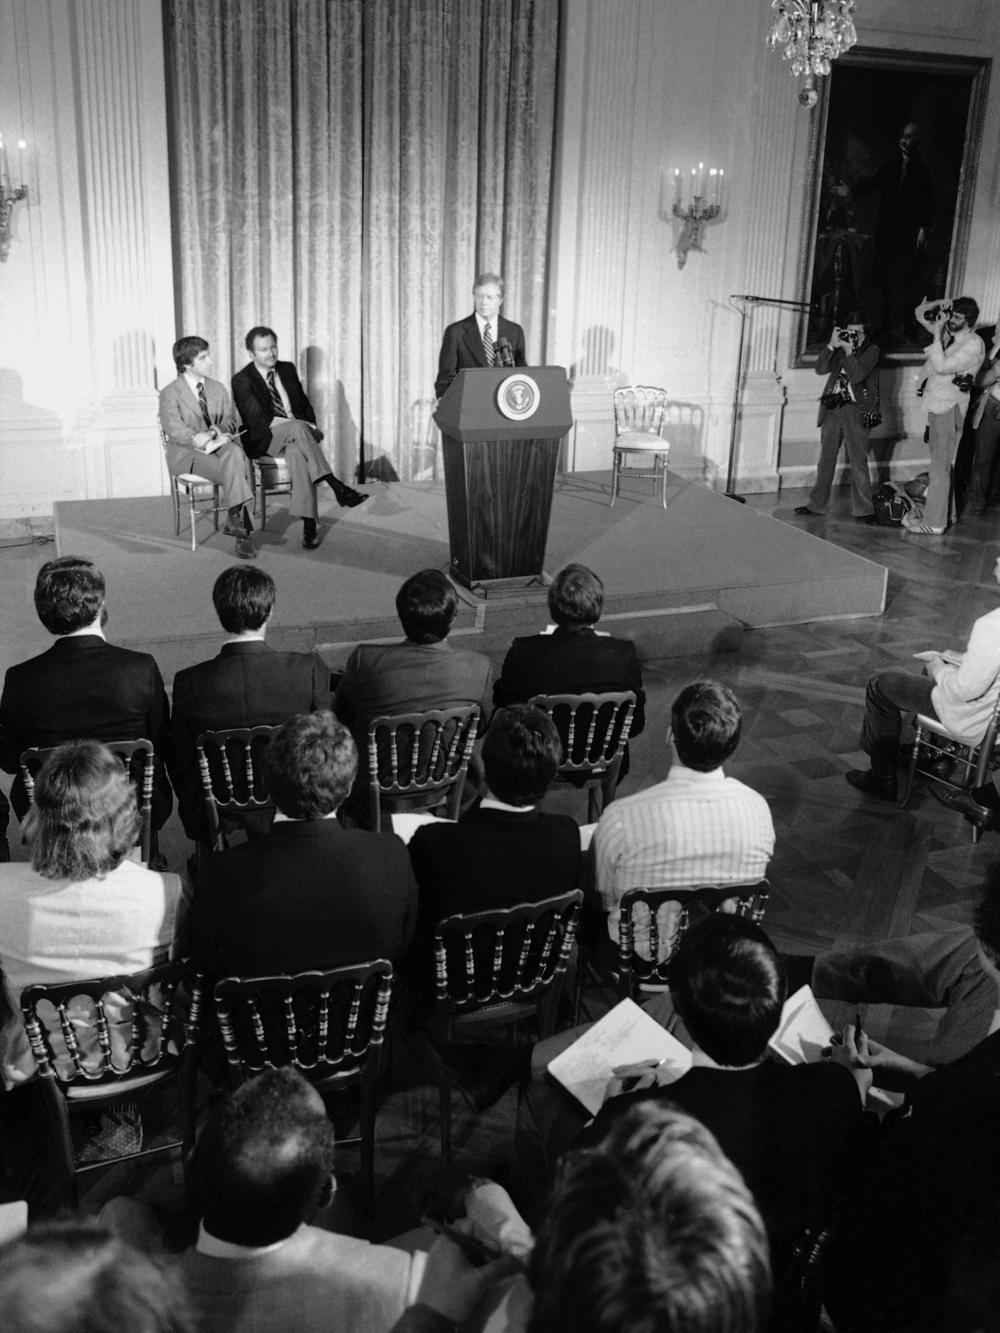 President Jimmy Carter addresses athletes at the White House who were to compete in the Moscow Summer Olympic Games on March 21, 1980. The president asked them to support his proposed boycott of the Games to punish the Soviets for their invasion of Afghanistan.